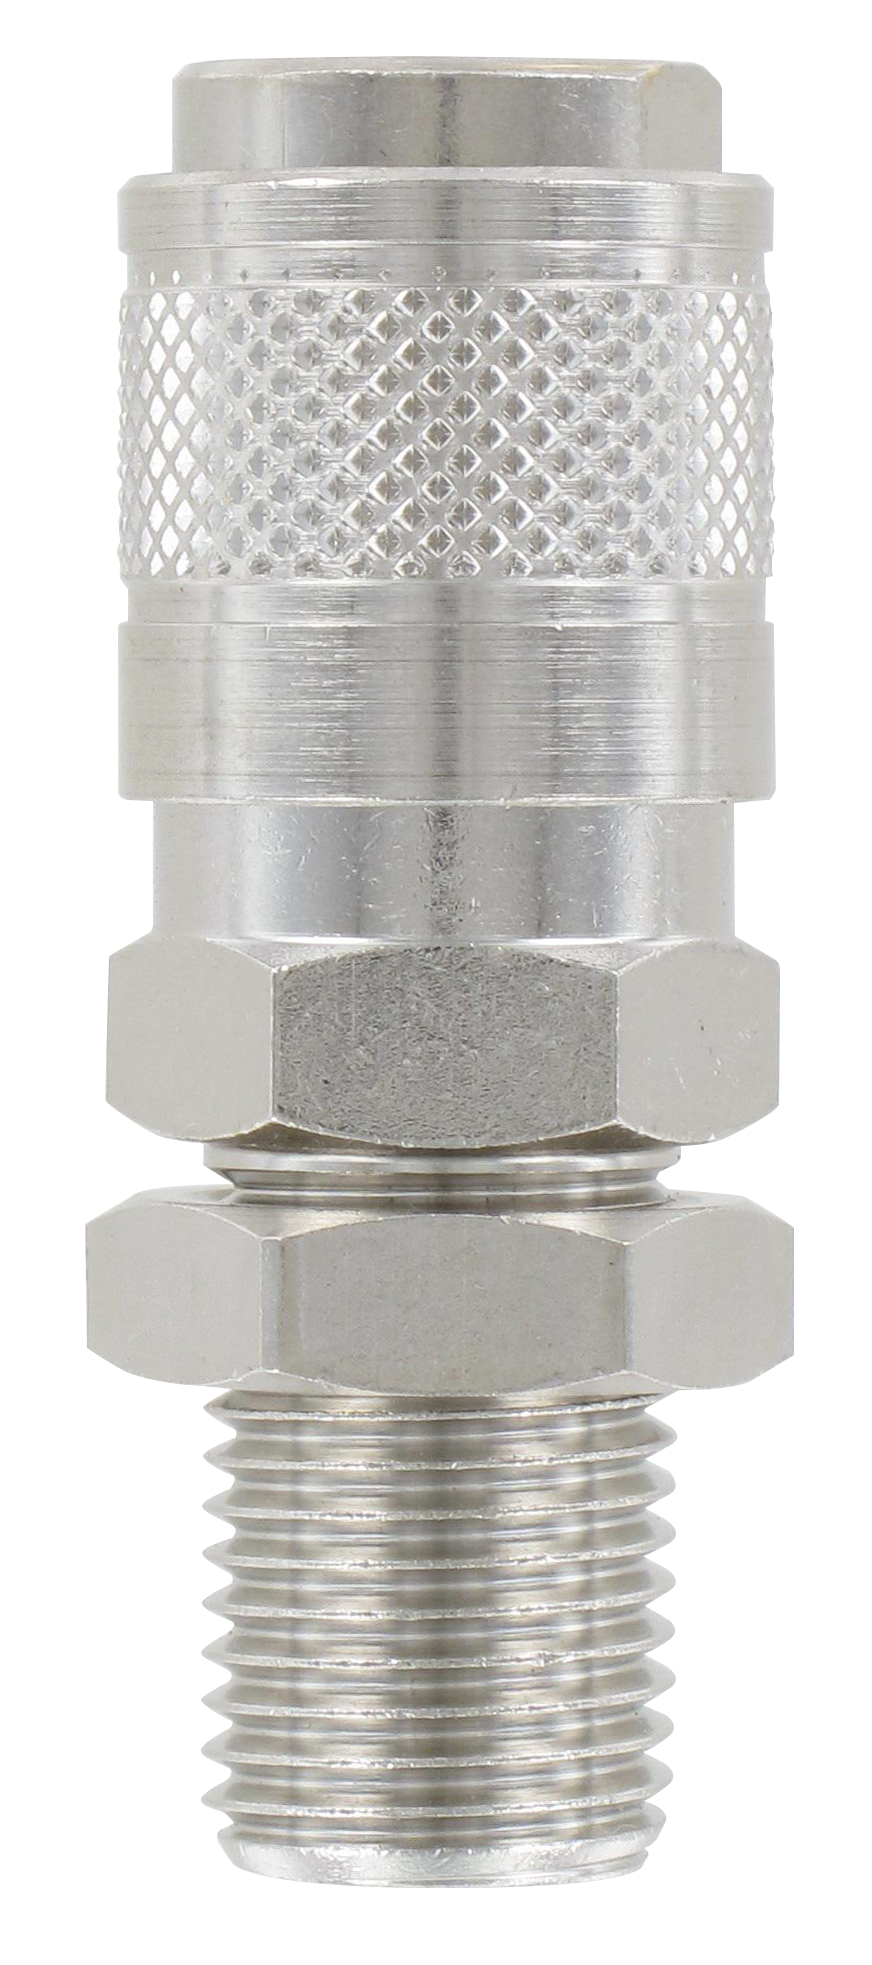 Quick-connect couplings, compact construction DN5 BULKHEAD SOCKET WITH MALE THREADED CONNECTION Fittings and quick-connect couplings